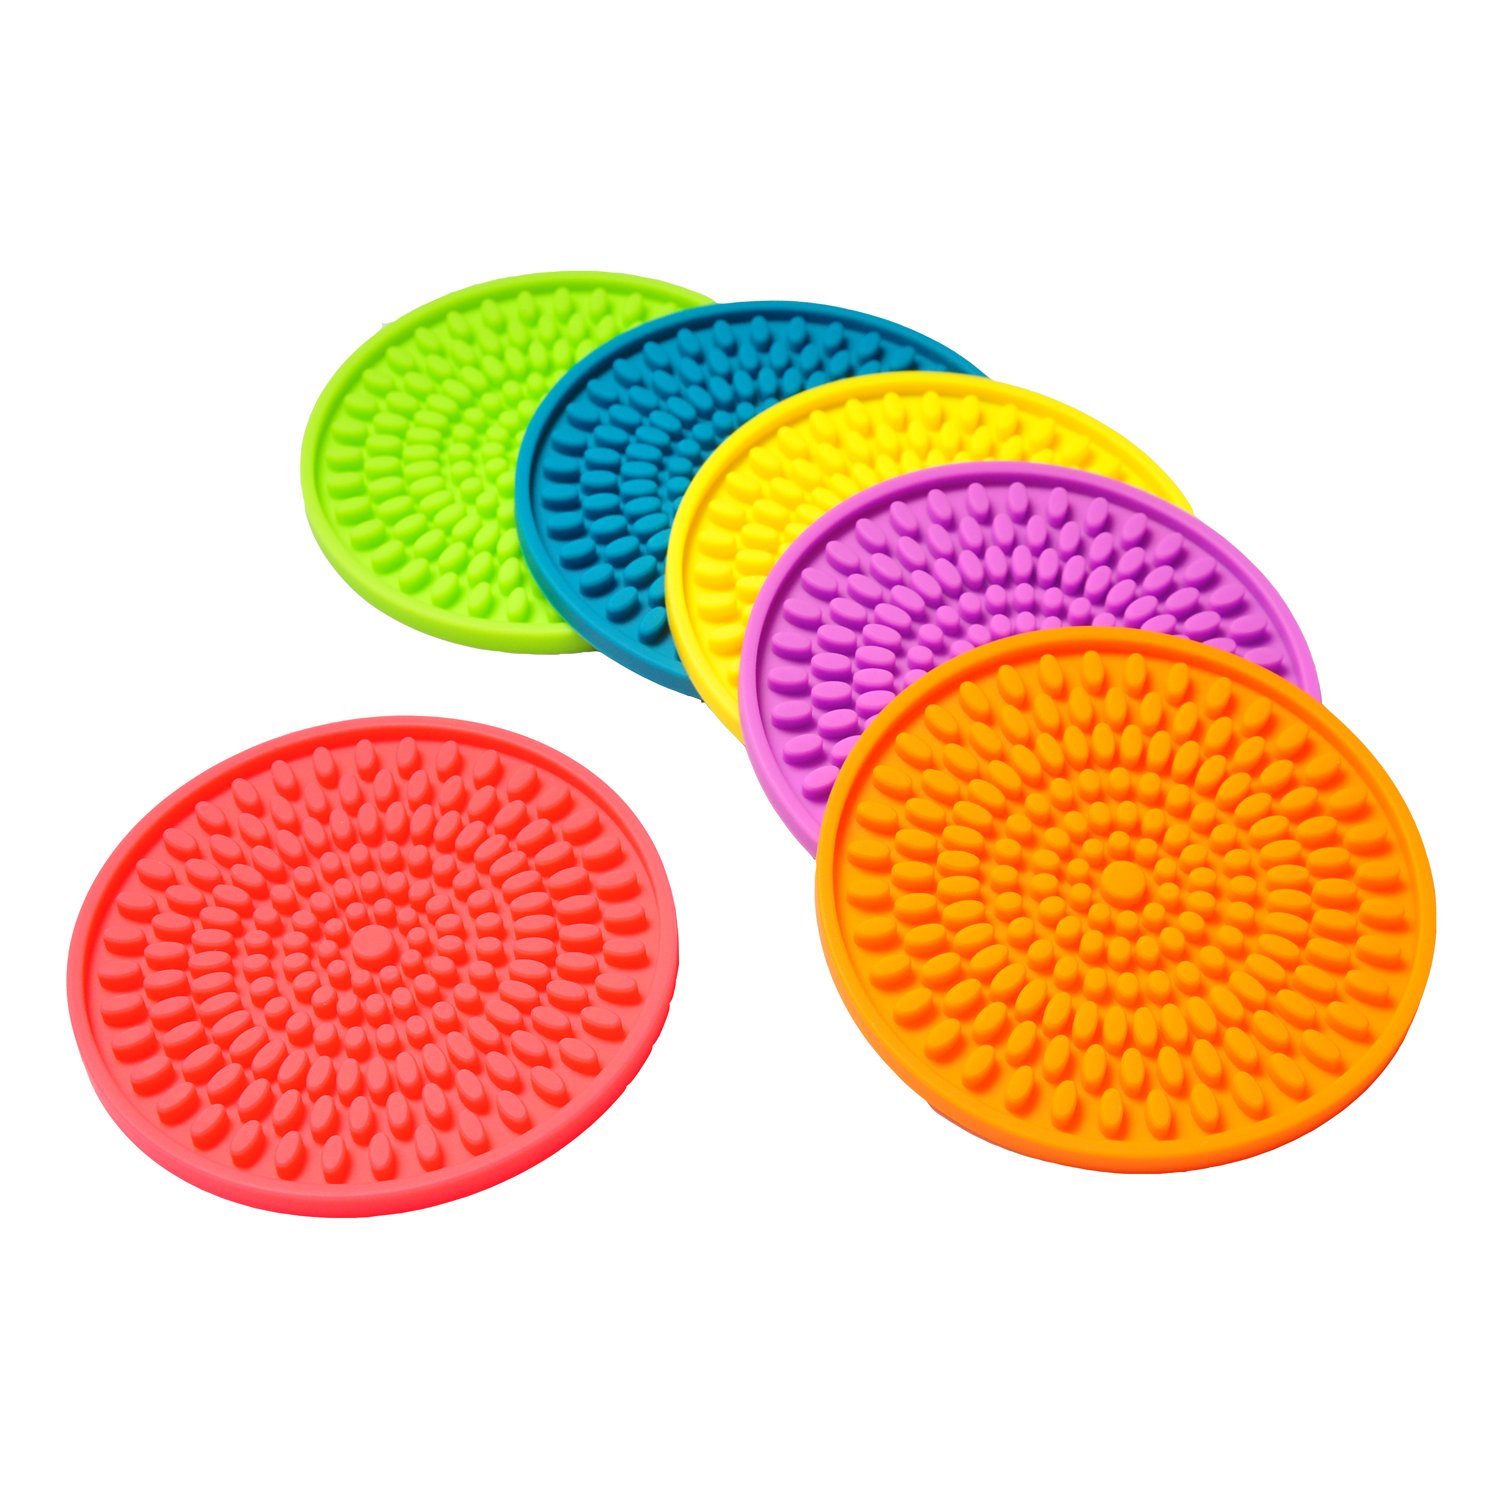 Colorful Coasters for Drinks Absorbent, Rubber Drink Coaster Set, Silicone Rainbow Coasters for Kids Coffee Table Desk, 4.3 Inch Oval Shape Deep Tray Pot Holder Trivet (Set of 6)